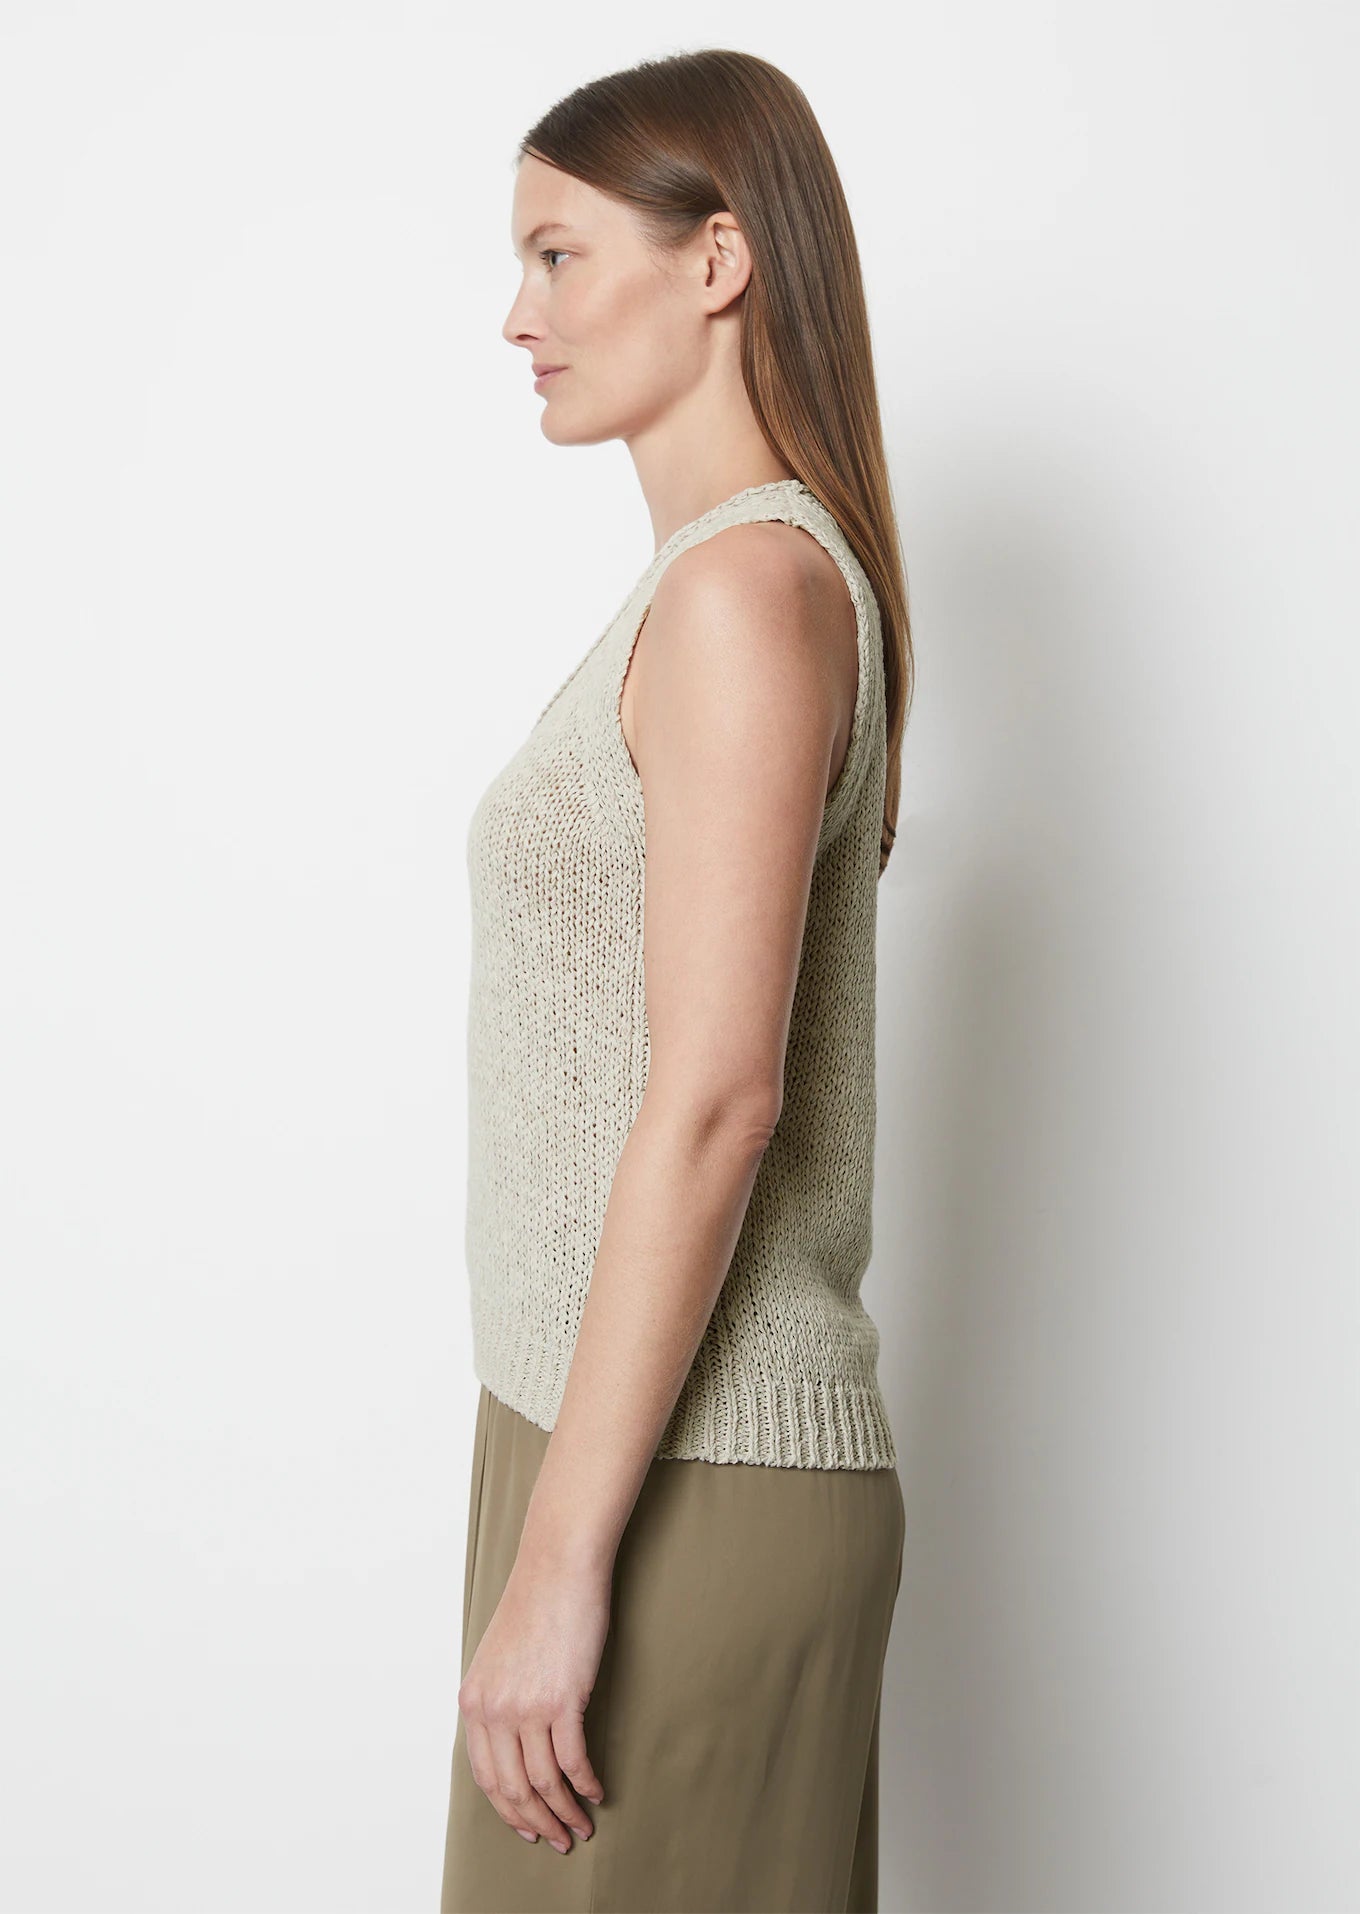 Knitted Vest Top in Stone Grey